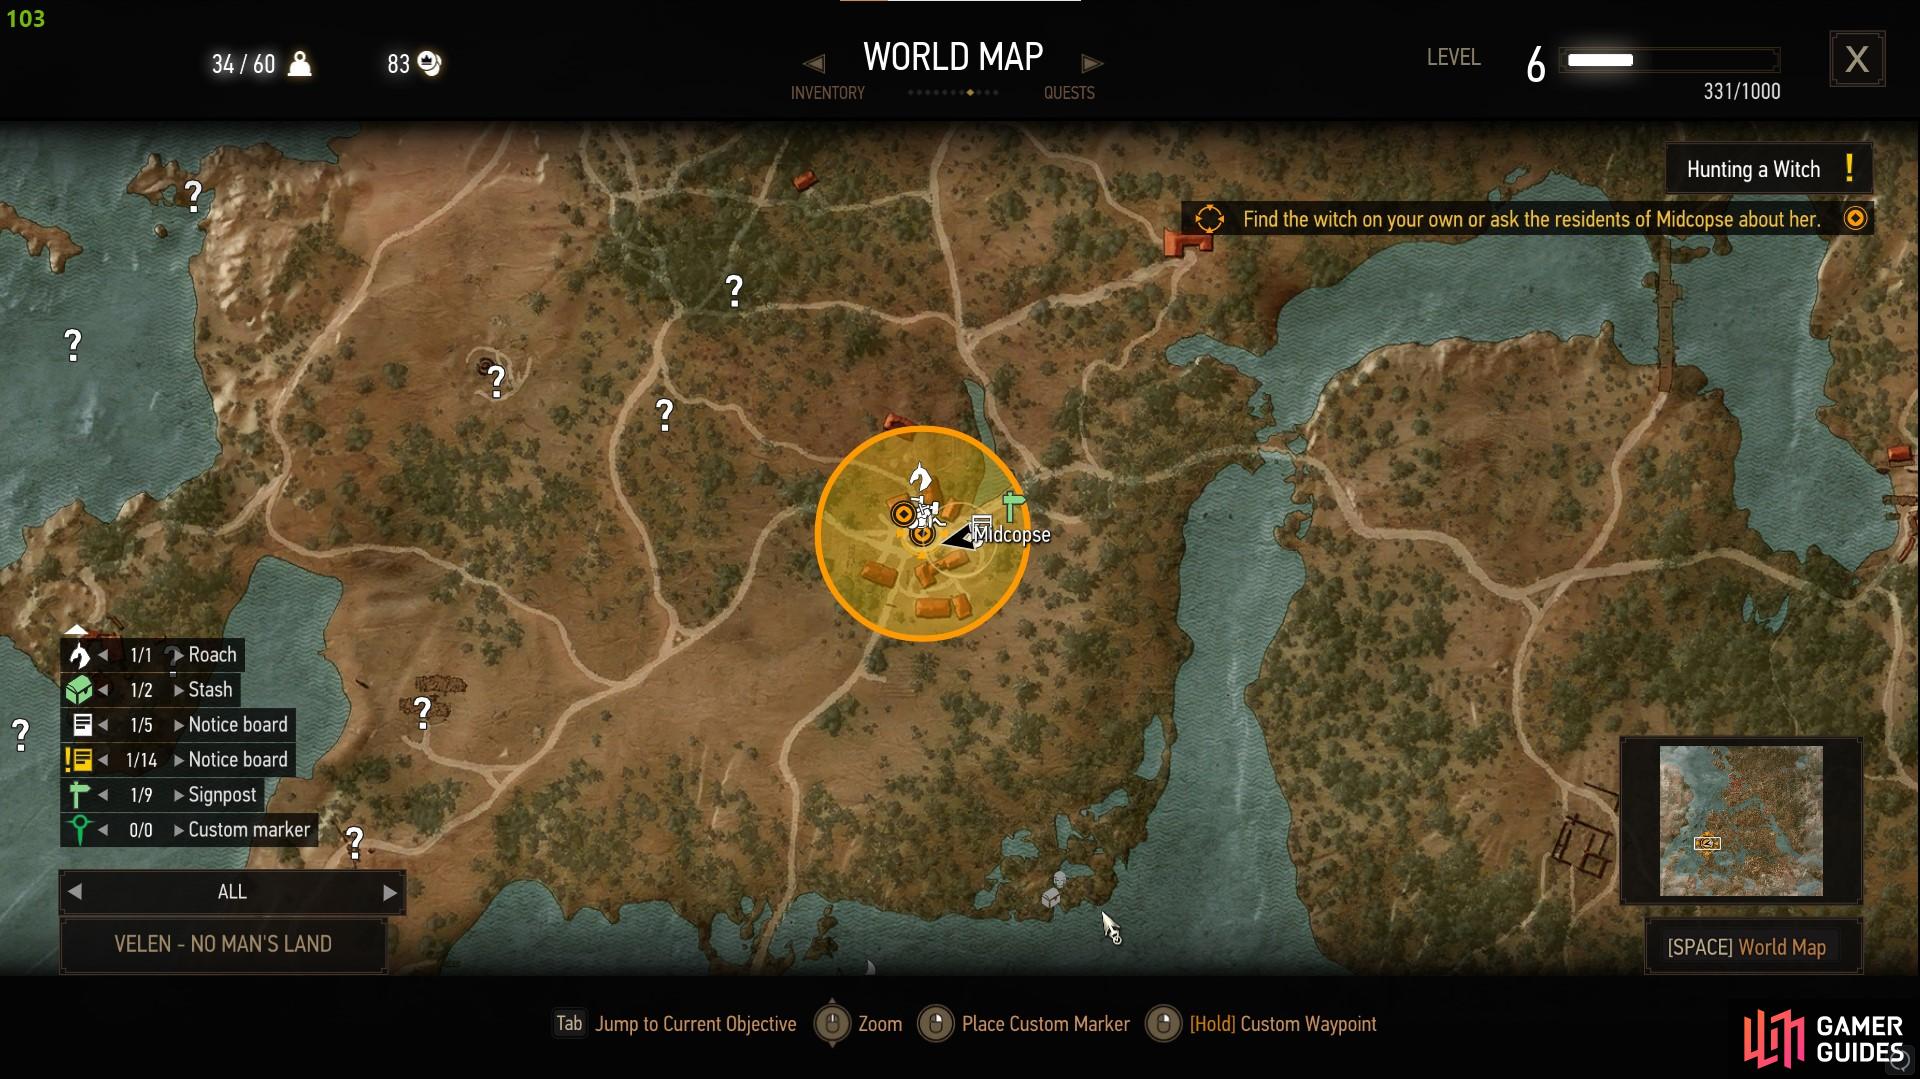 Players must investigate future leads and complete their associated storylines before completing Family Matters, such as the Hunting the Witch Quest.